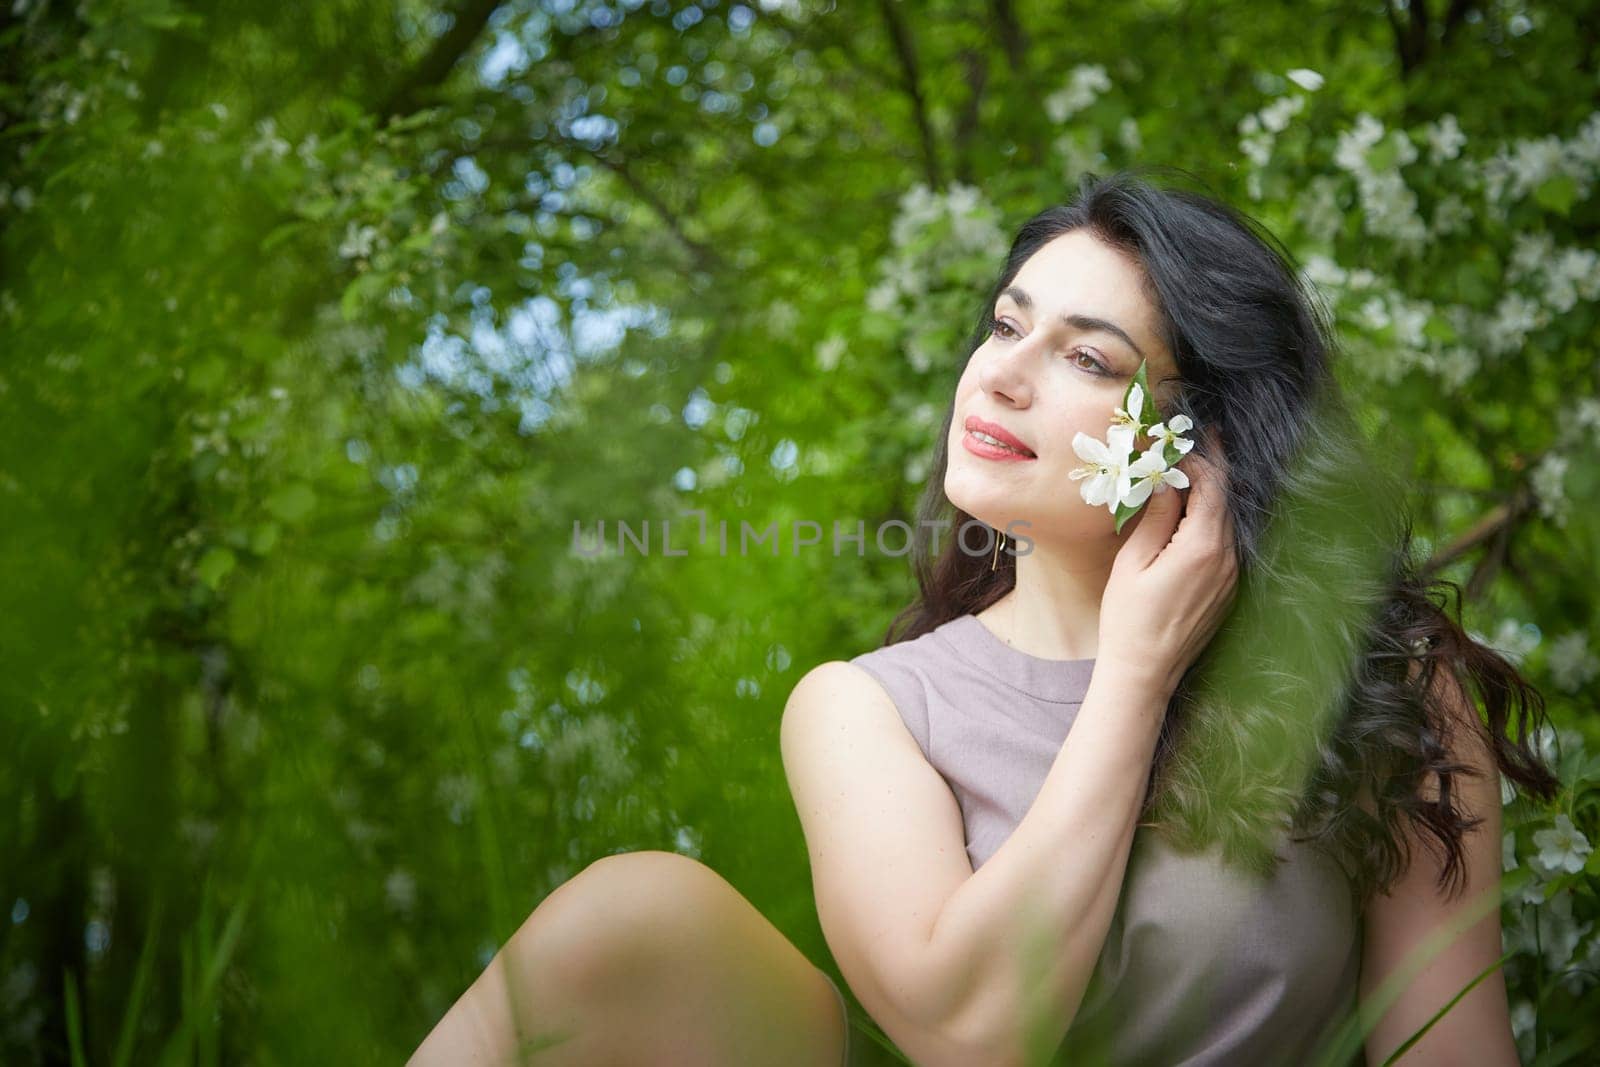 Joyous brunette woman near Blossoms of apple tree in a Spring Garden outdoors. Concept of face and body care. The scent of perfume and tenderness by keleny